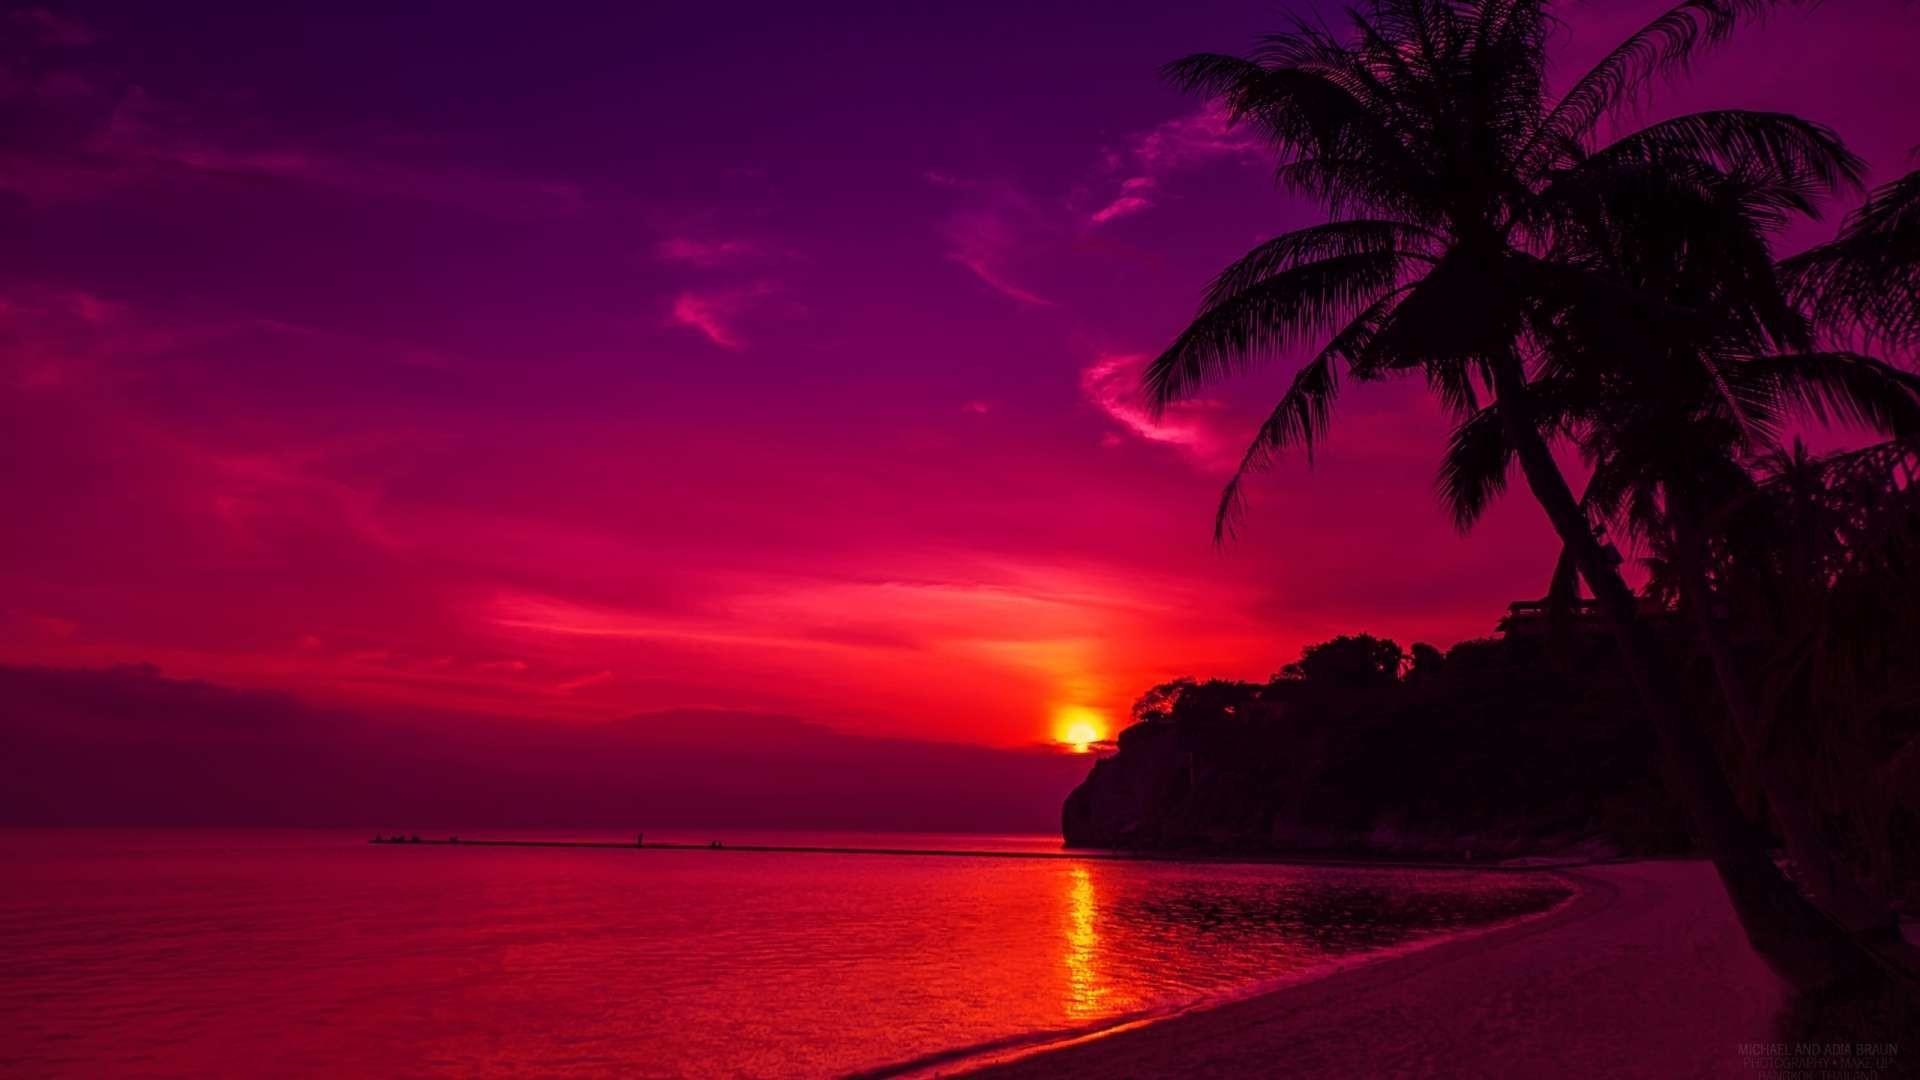 Wallpapers For > Hd Beach Sunset Wallpapers 1080p - Sunset Backgrounds , HD Wallpaper & Backgrounds